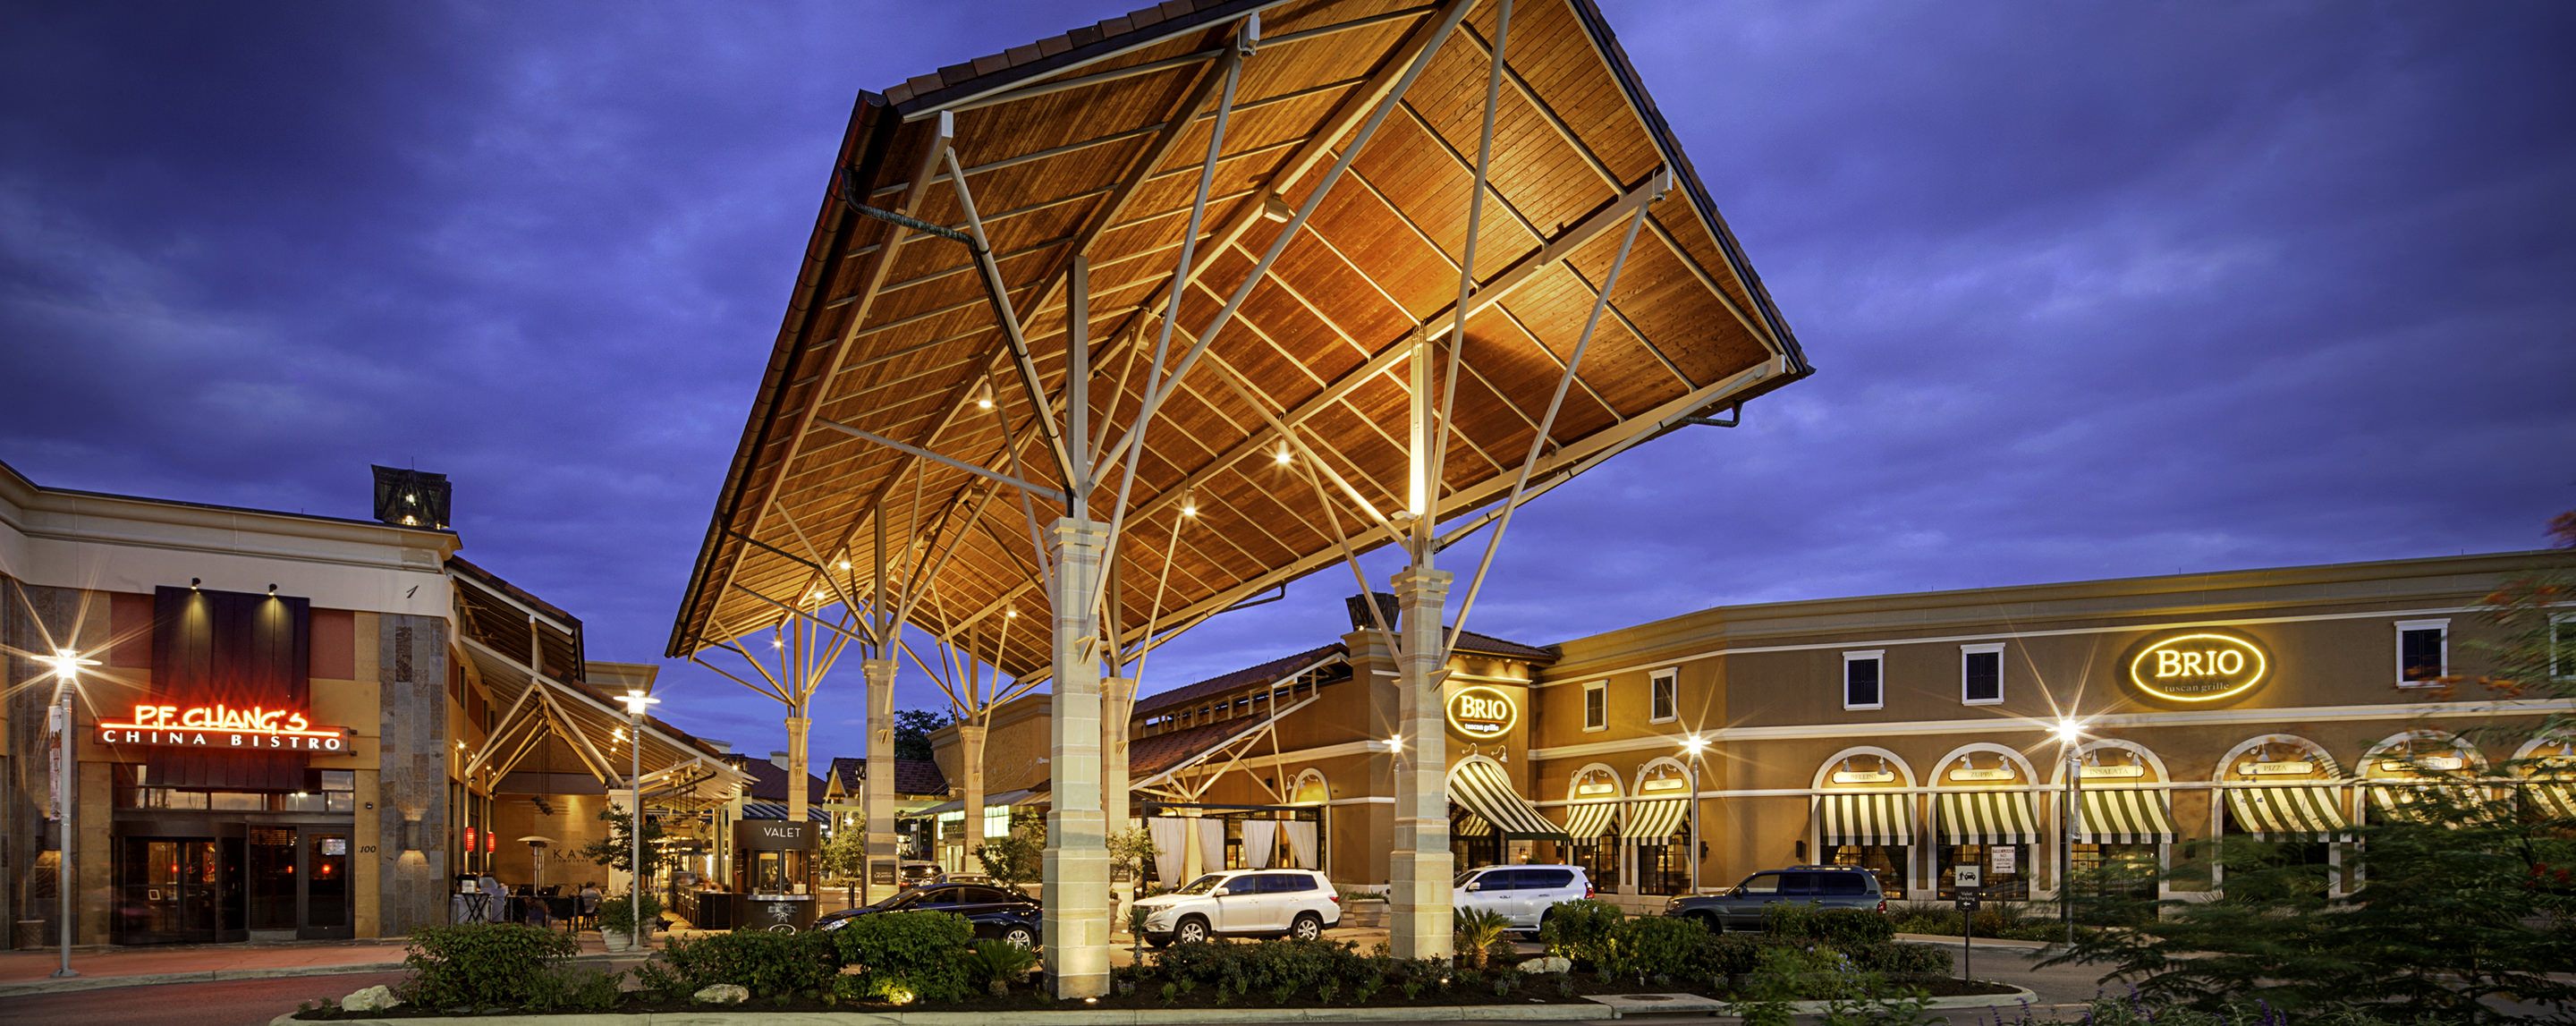 A large, well lit awning stands in front of a sprawling building. Several storefronts are visible, including Brio.